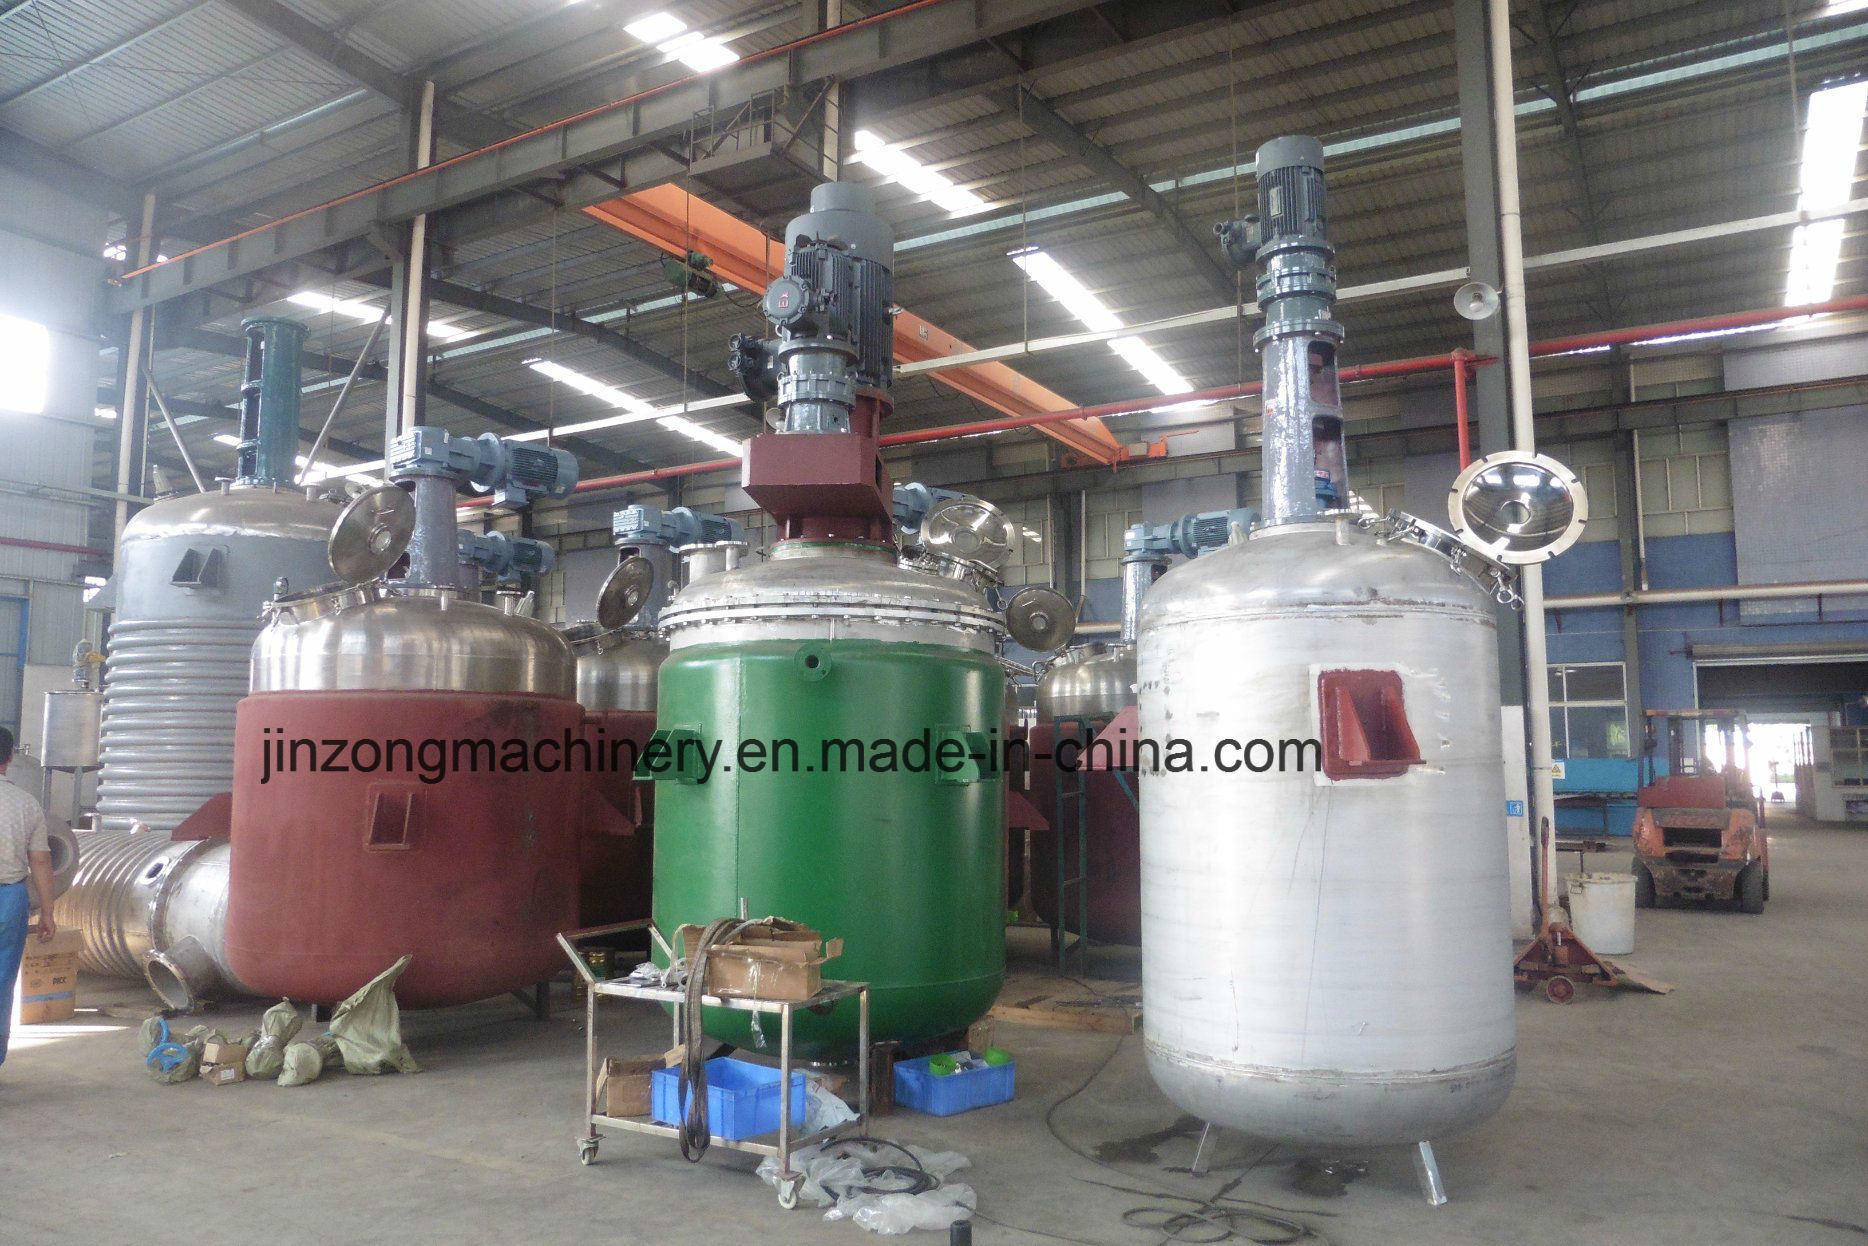 Stainless Steel Jacketed Reactor for Chemial Industry